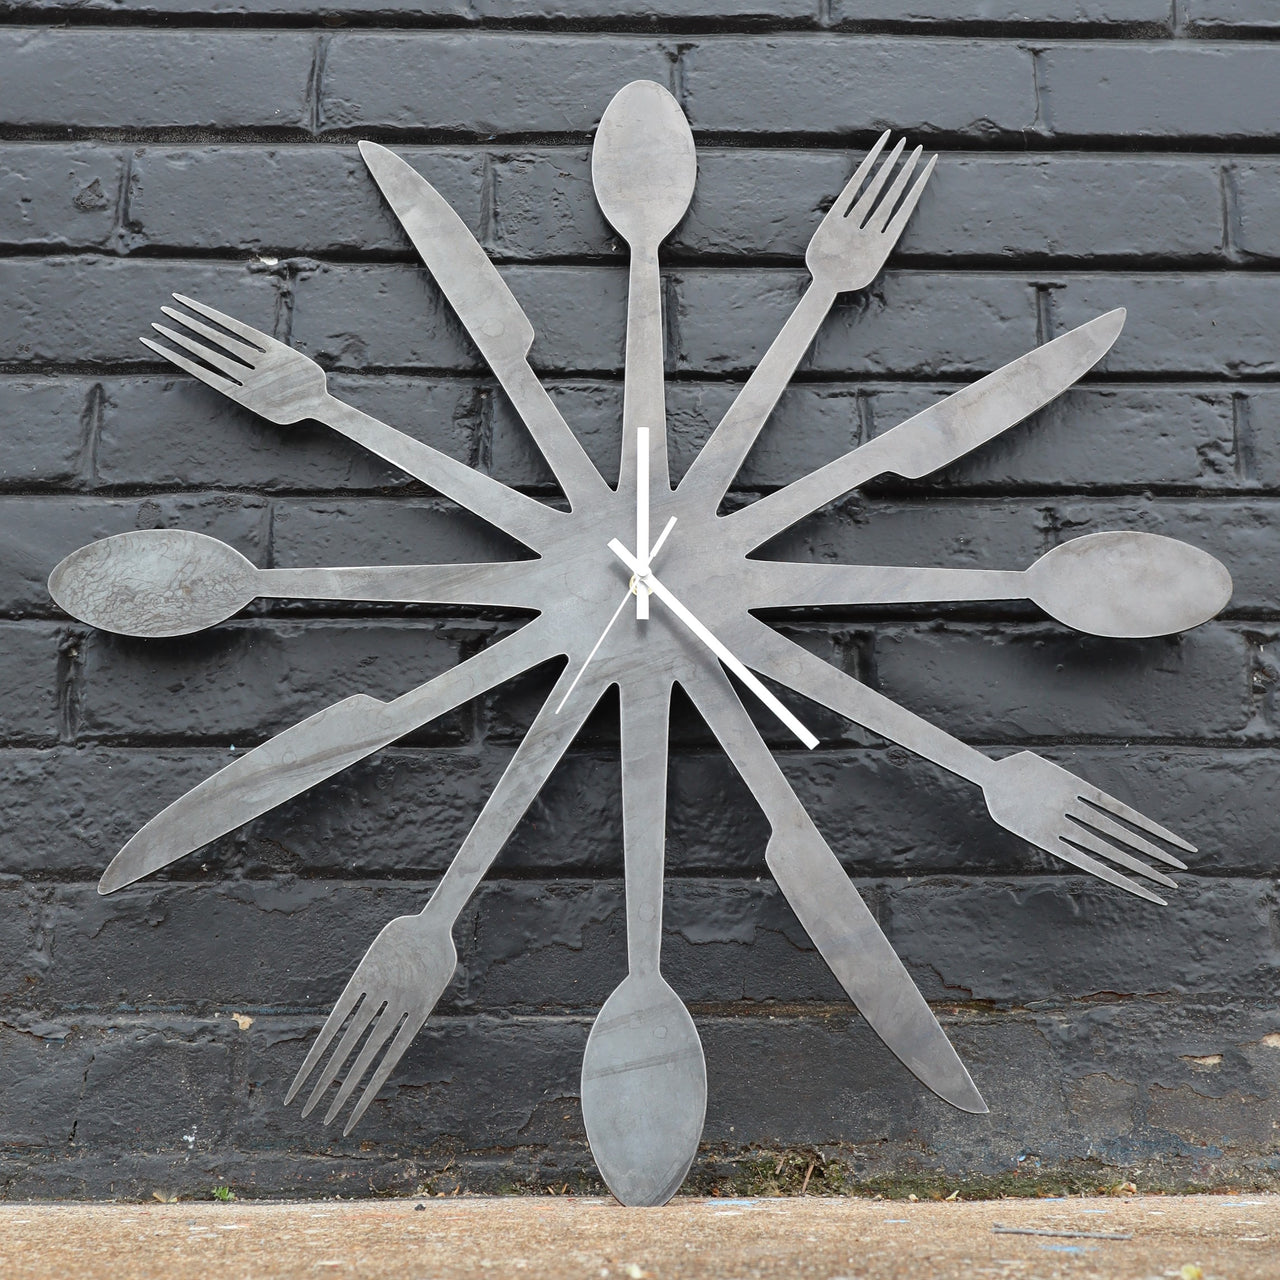 Foodie Metal Clock - Rustic Home Cutlery Wall Art - 24" Diameter with Spoons, Forks, and Knives